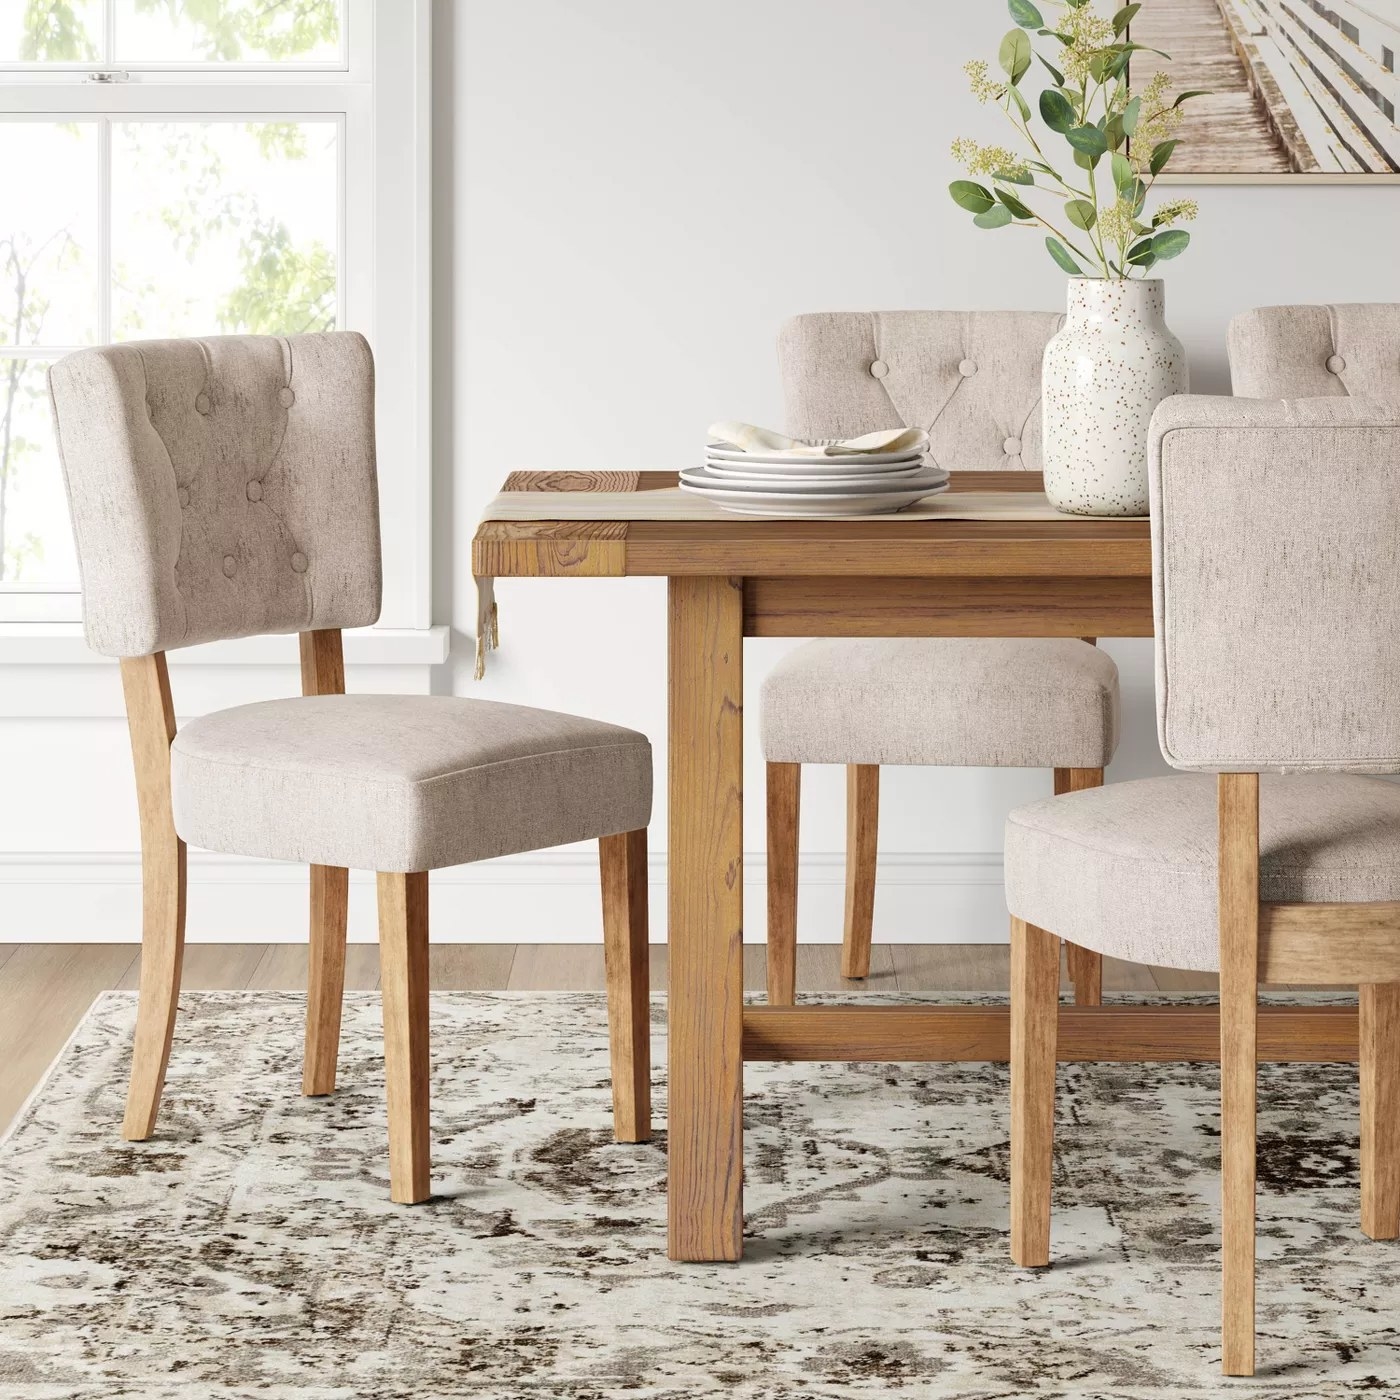 a set of dining chairs around a dining table